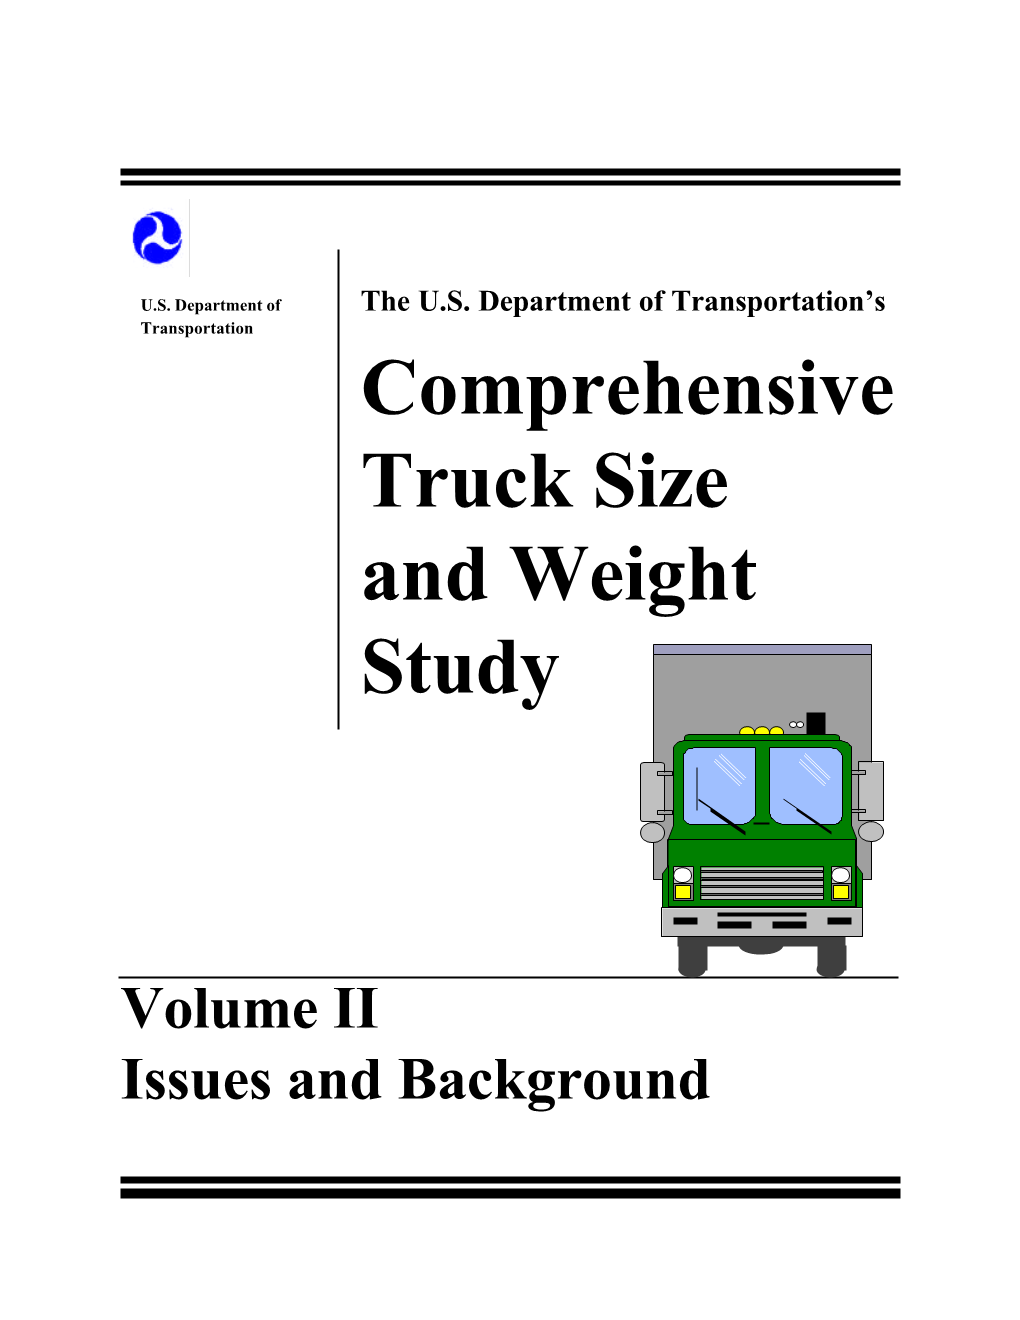 Comprehensive Truck Size and Weight Study